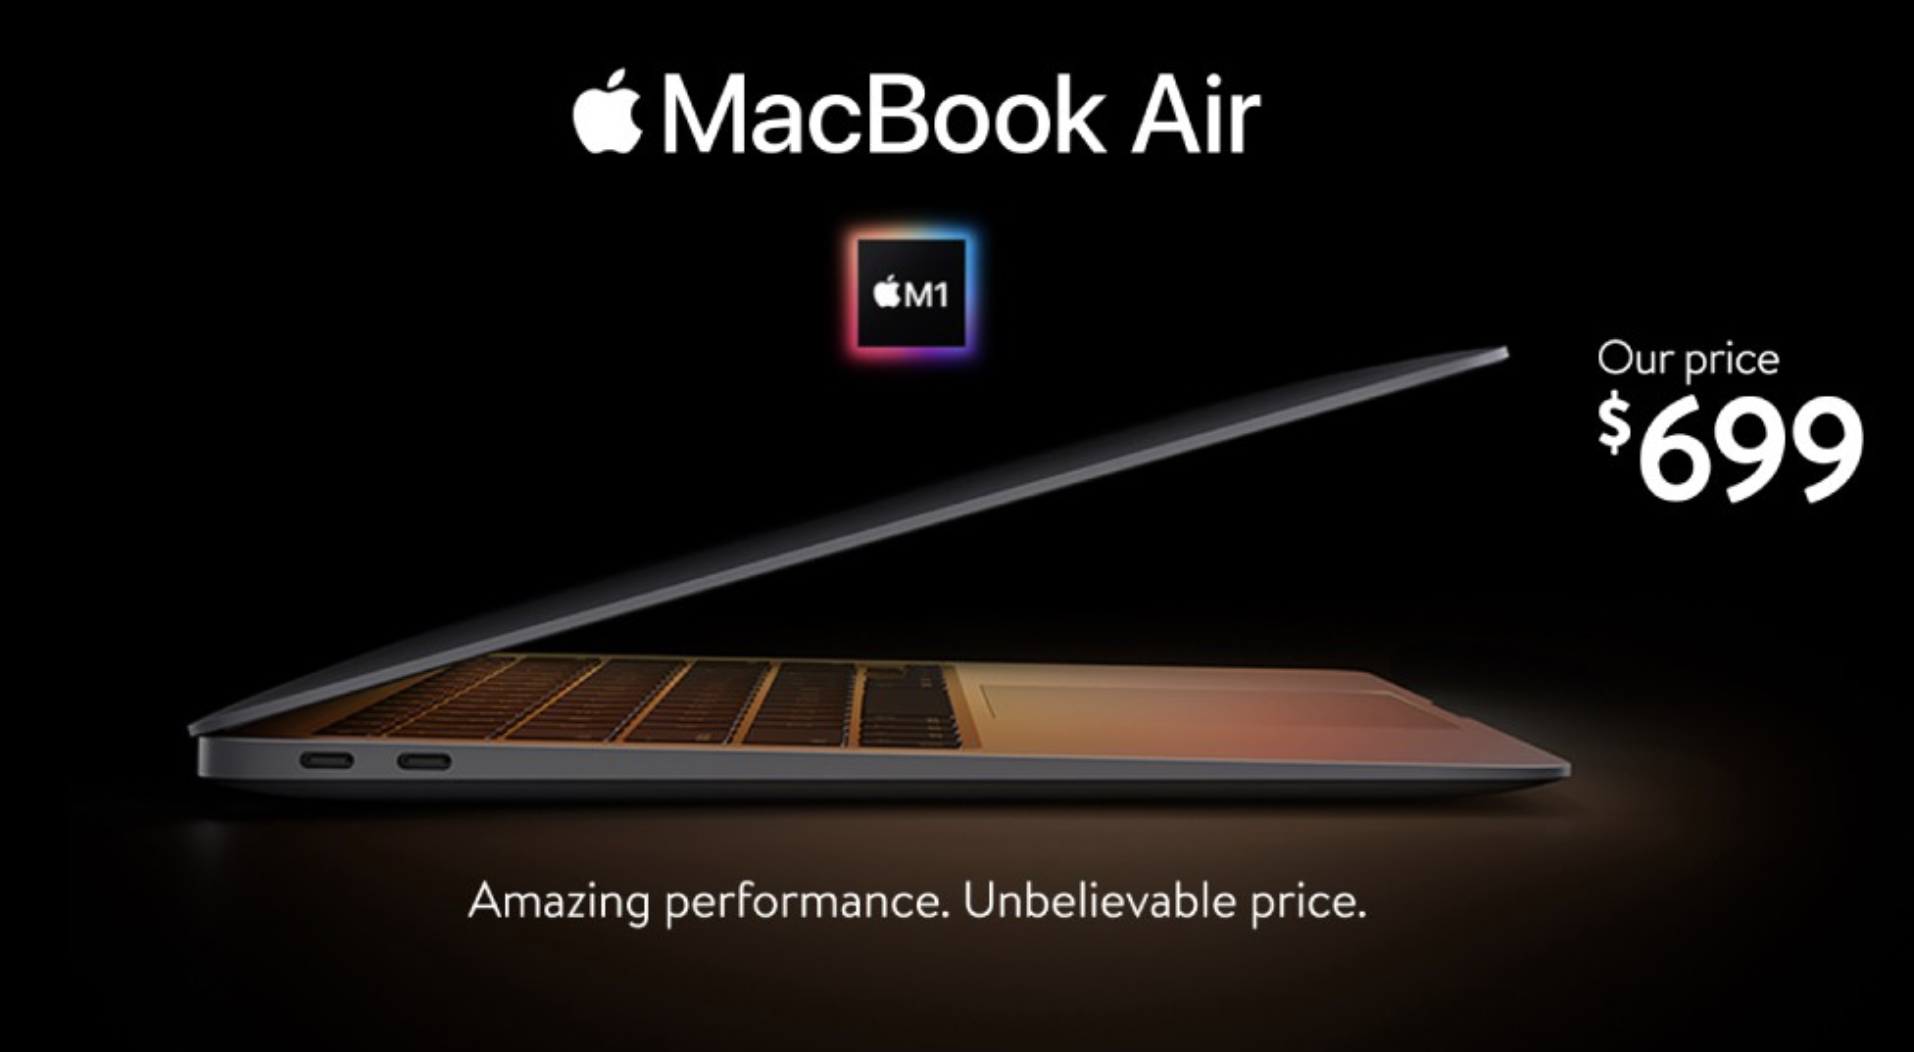 The Walmart ad for the MacBook Air product. 